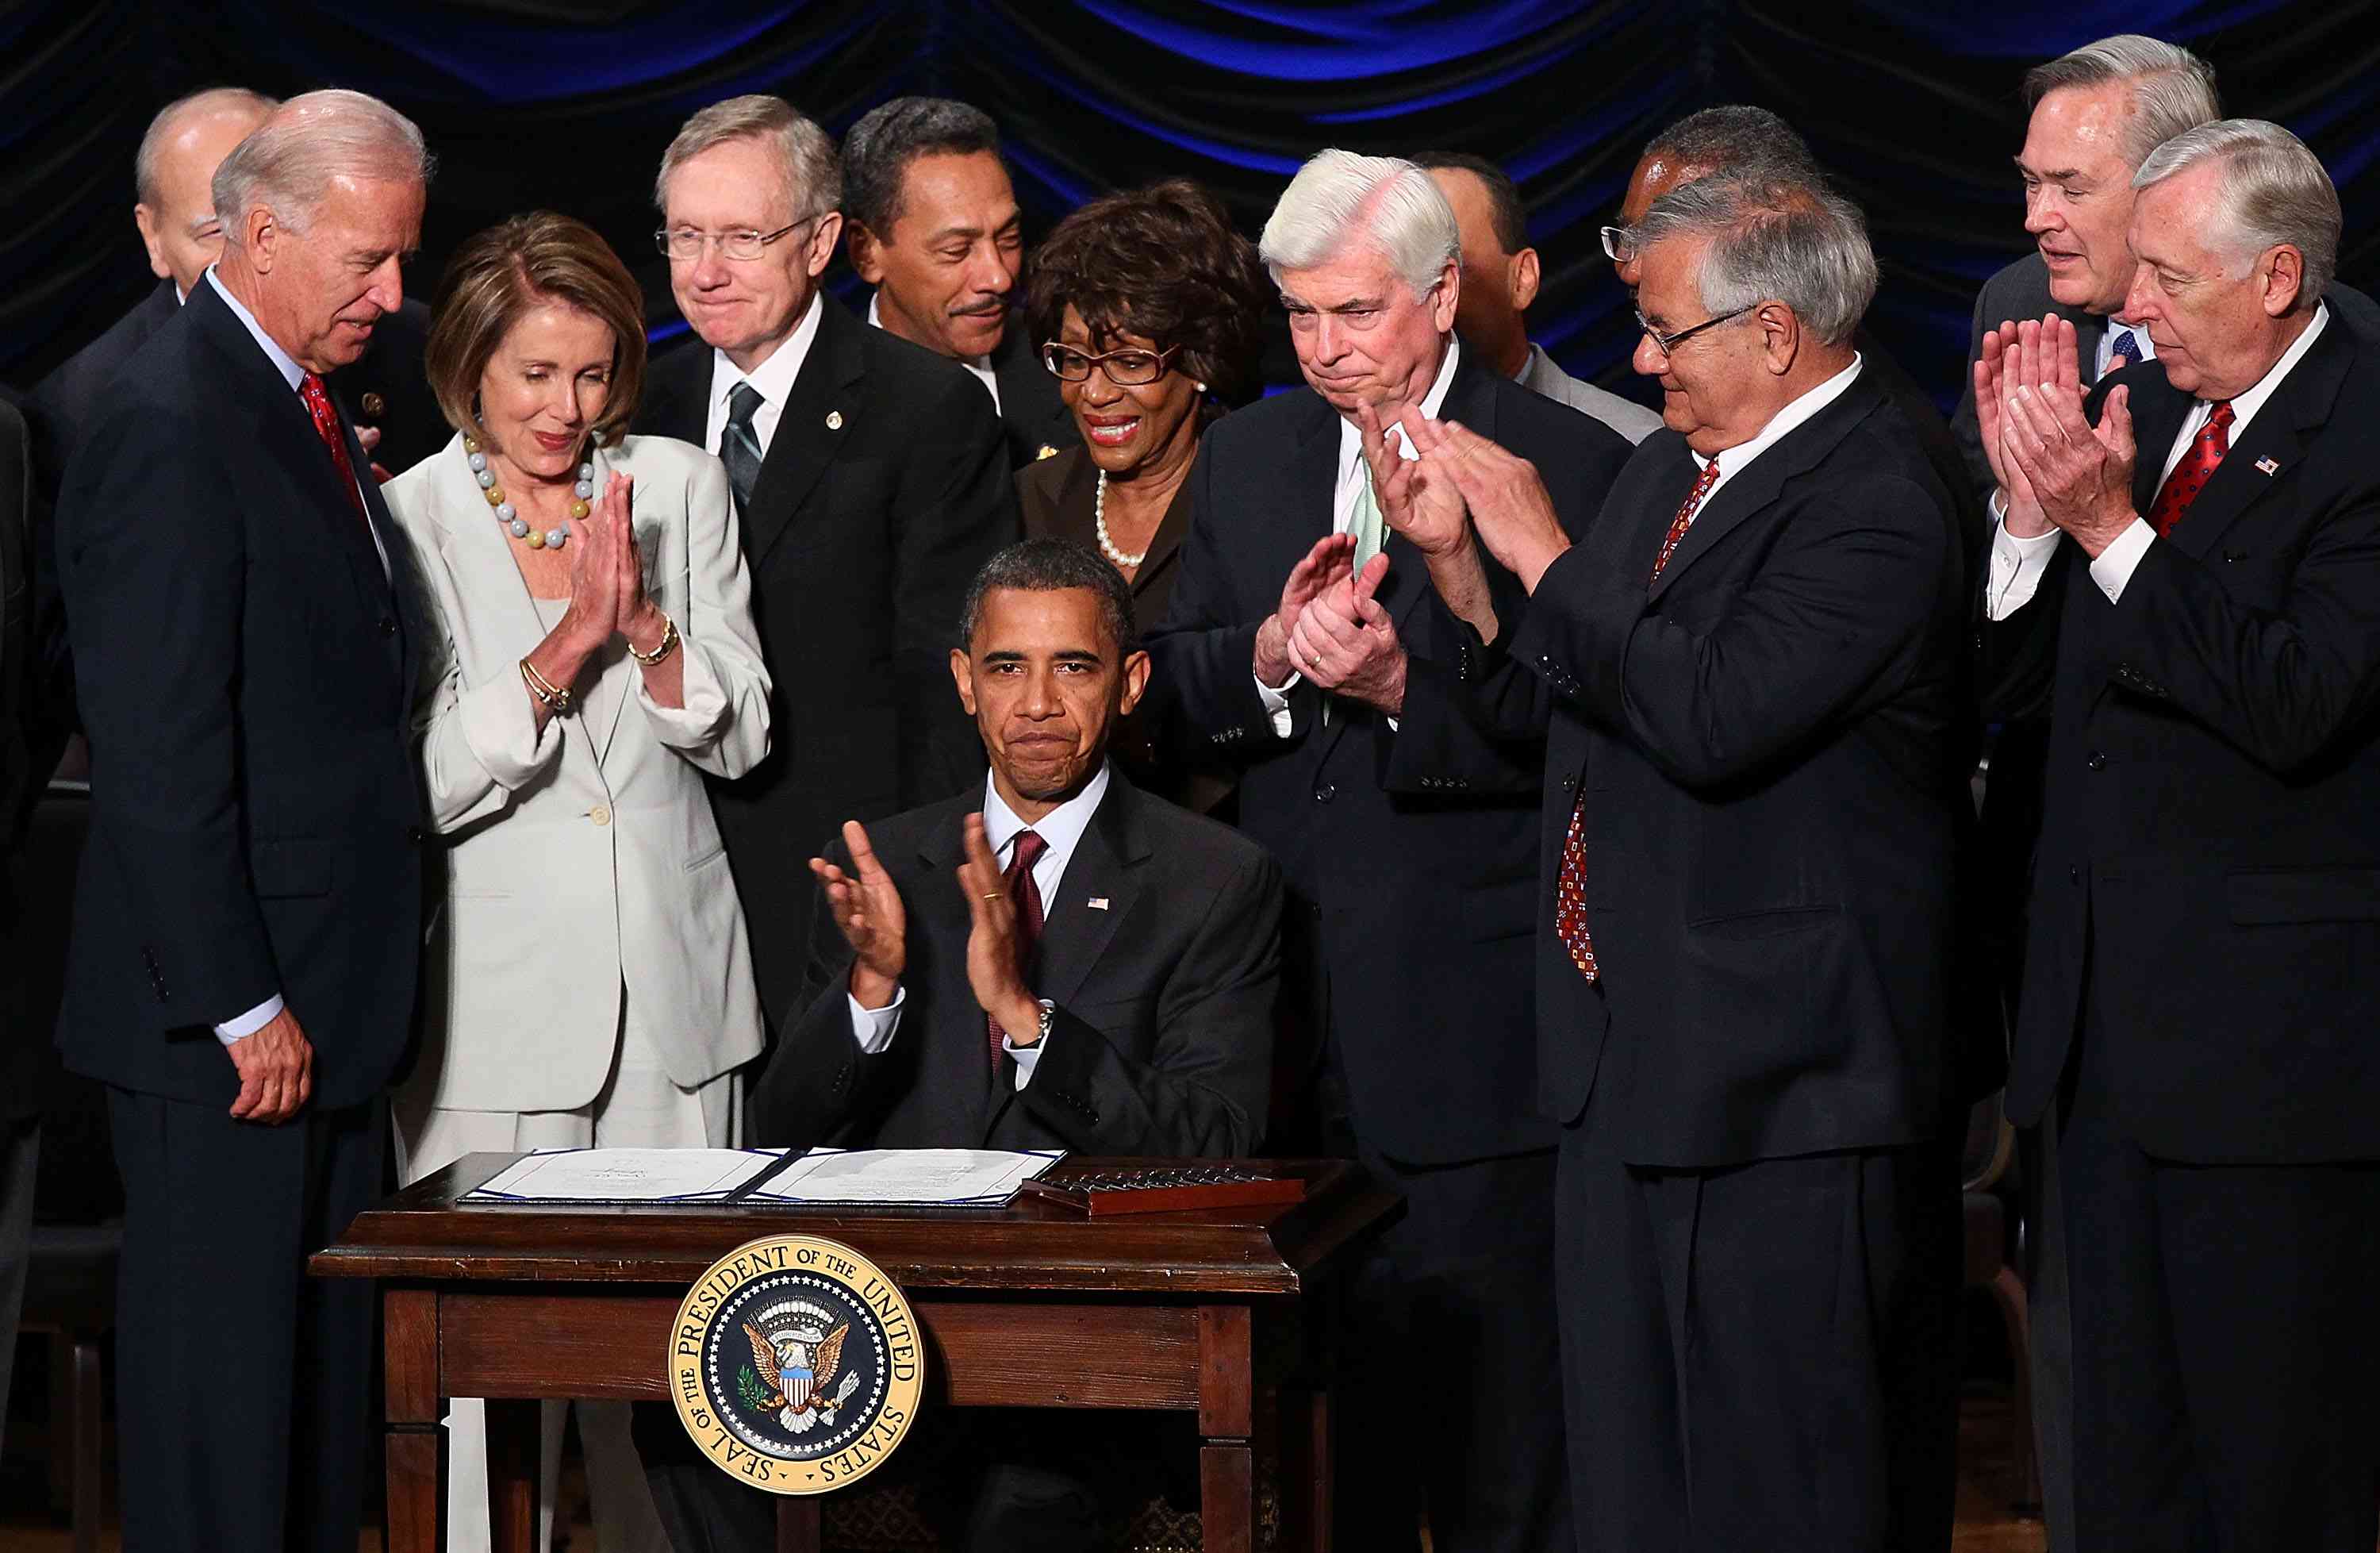 U.S. President Barack Obama signs the Dodd-Frank Wall Street Reform and Consumer Protection Act